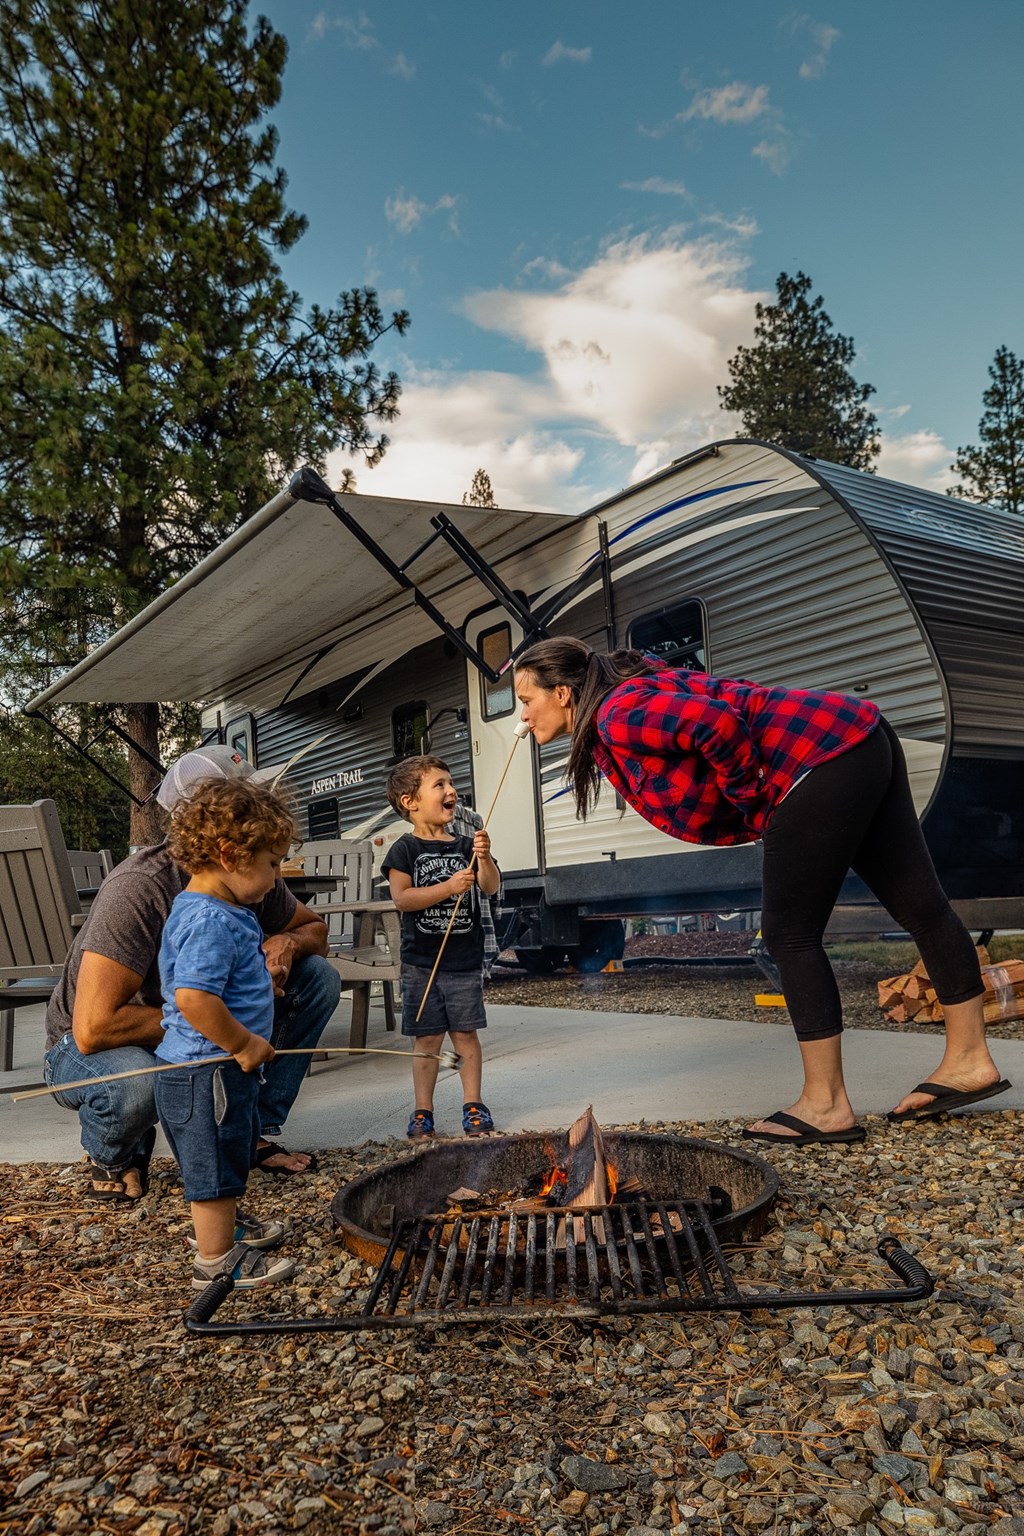 Tips for First Time Campers at Leavenworth KOA